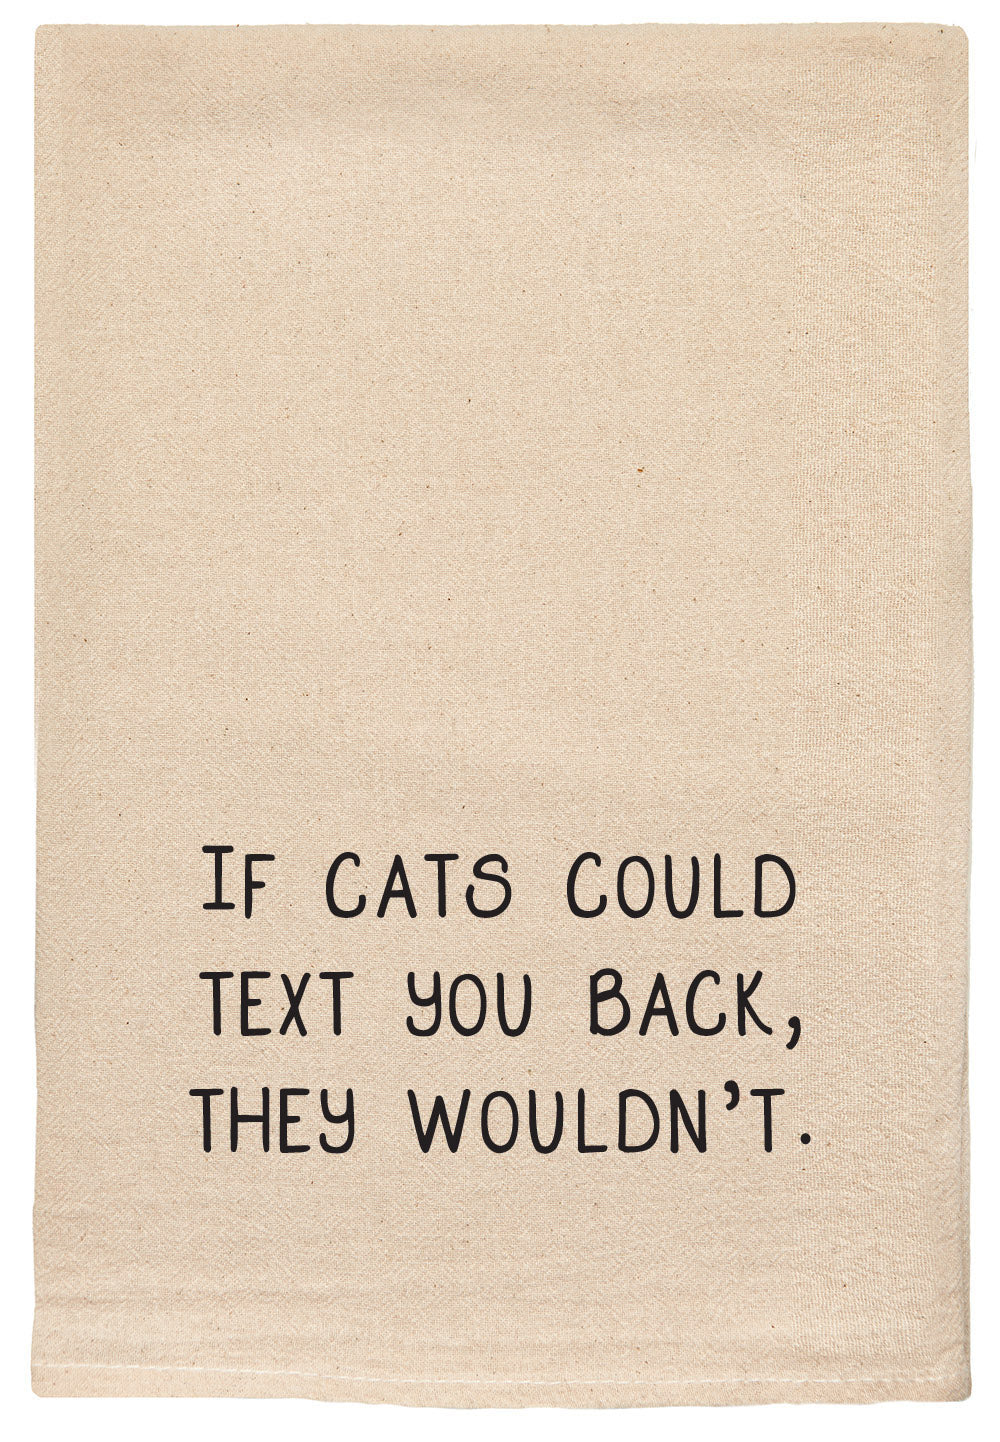 If cats could text you back, they wouldn't.